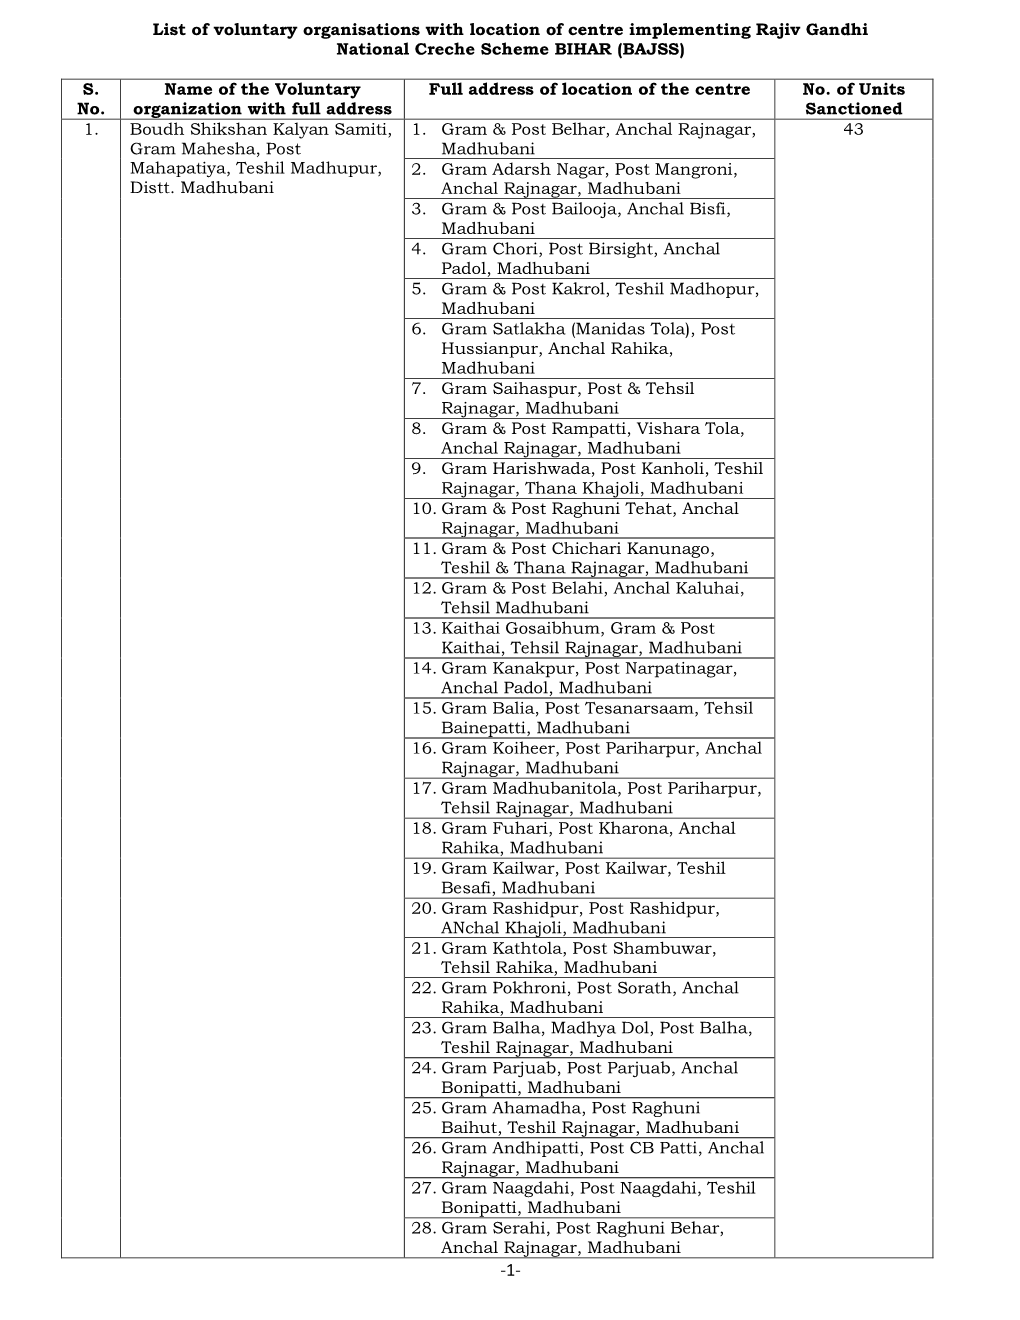 List of Voluntary Organisations with Location of Centre Implementing Rajiv Gandhi National Creche Scheme BIHAR (BAJSS) S. No. Na